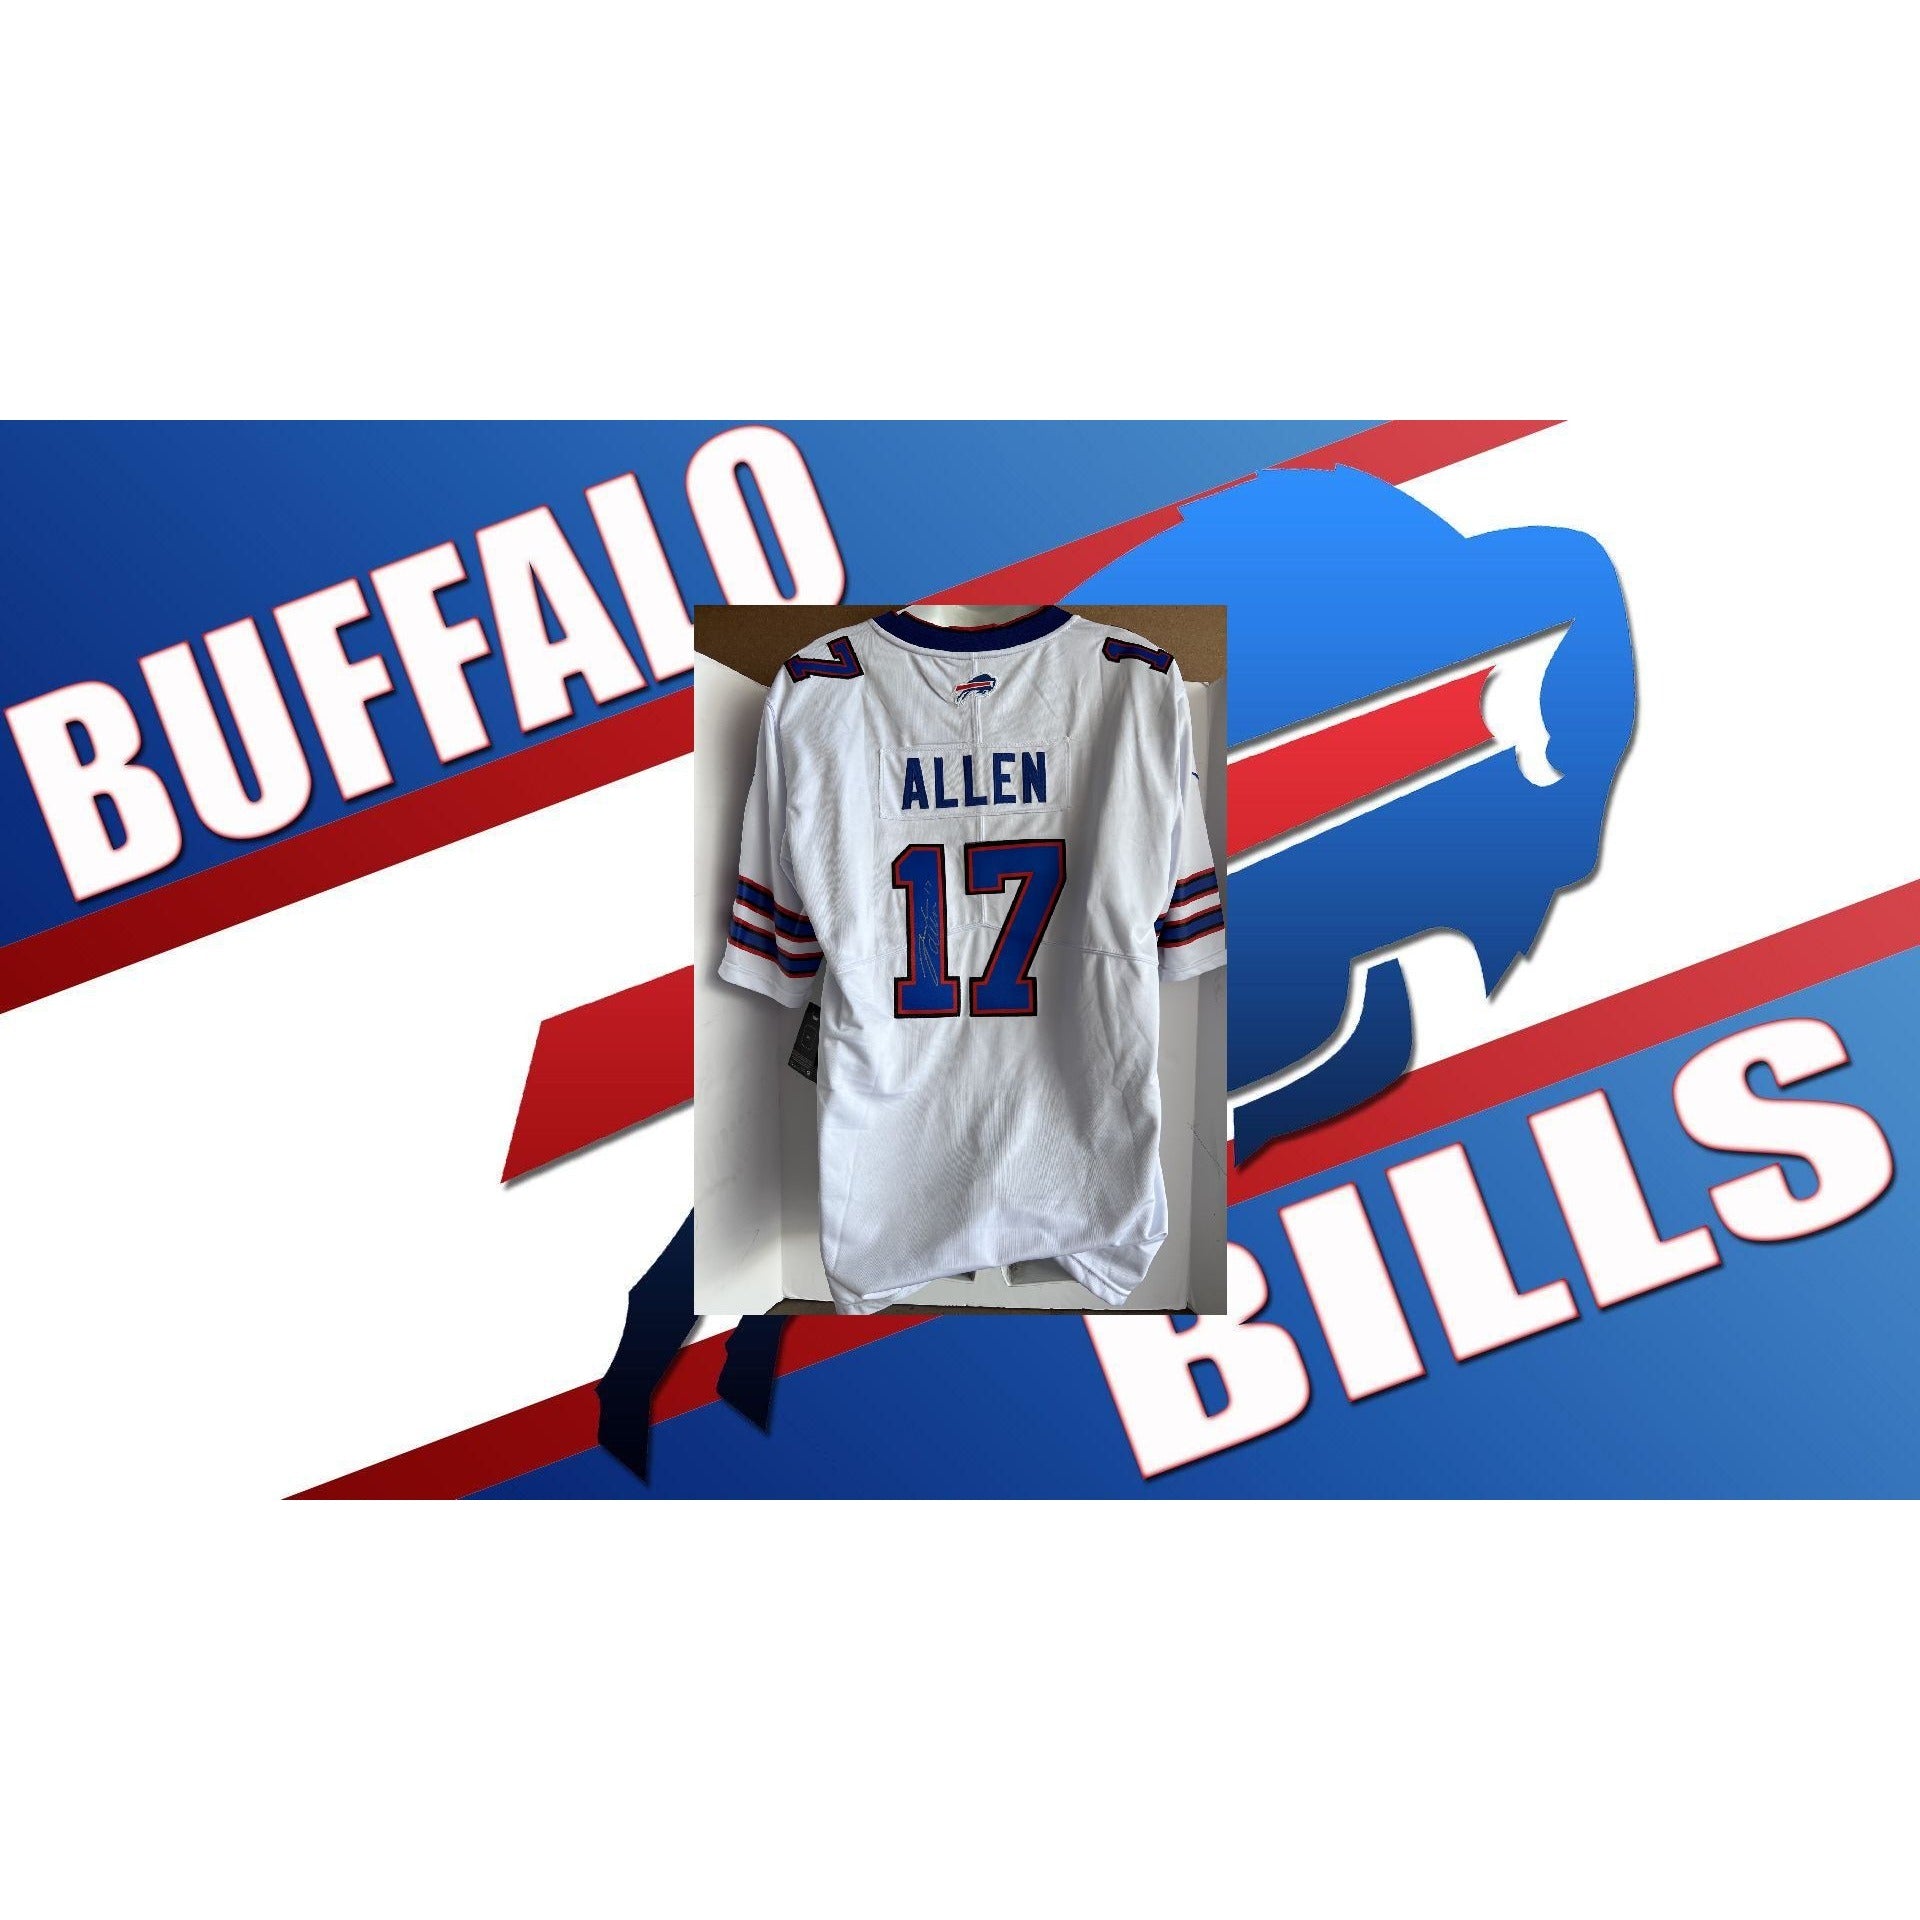 Josh Allen Buffalo Bills game model Nike large jersey signed with proof